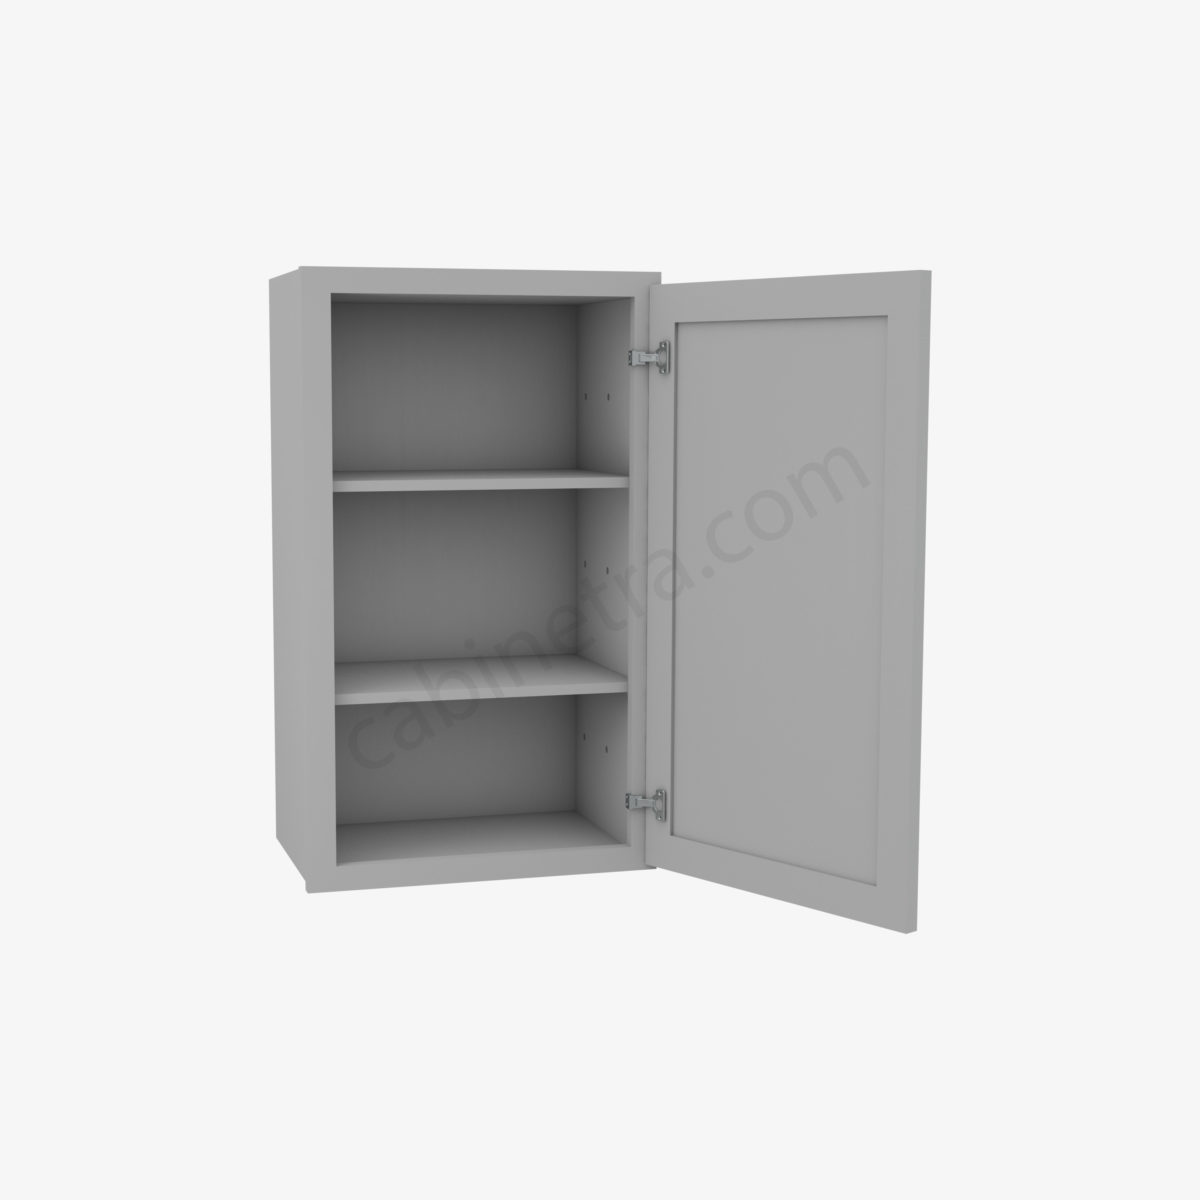 AB W1830 1 Forevermark Lait Gray Shaker Cabinetra scaled